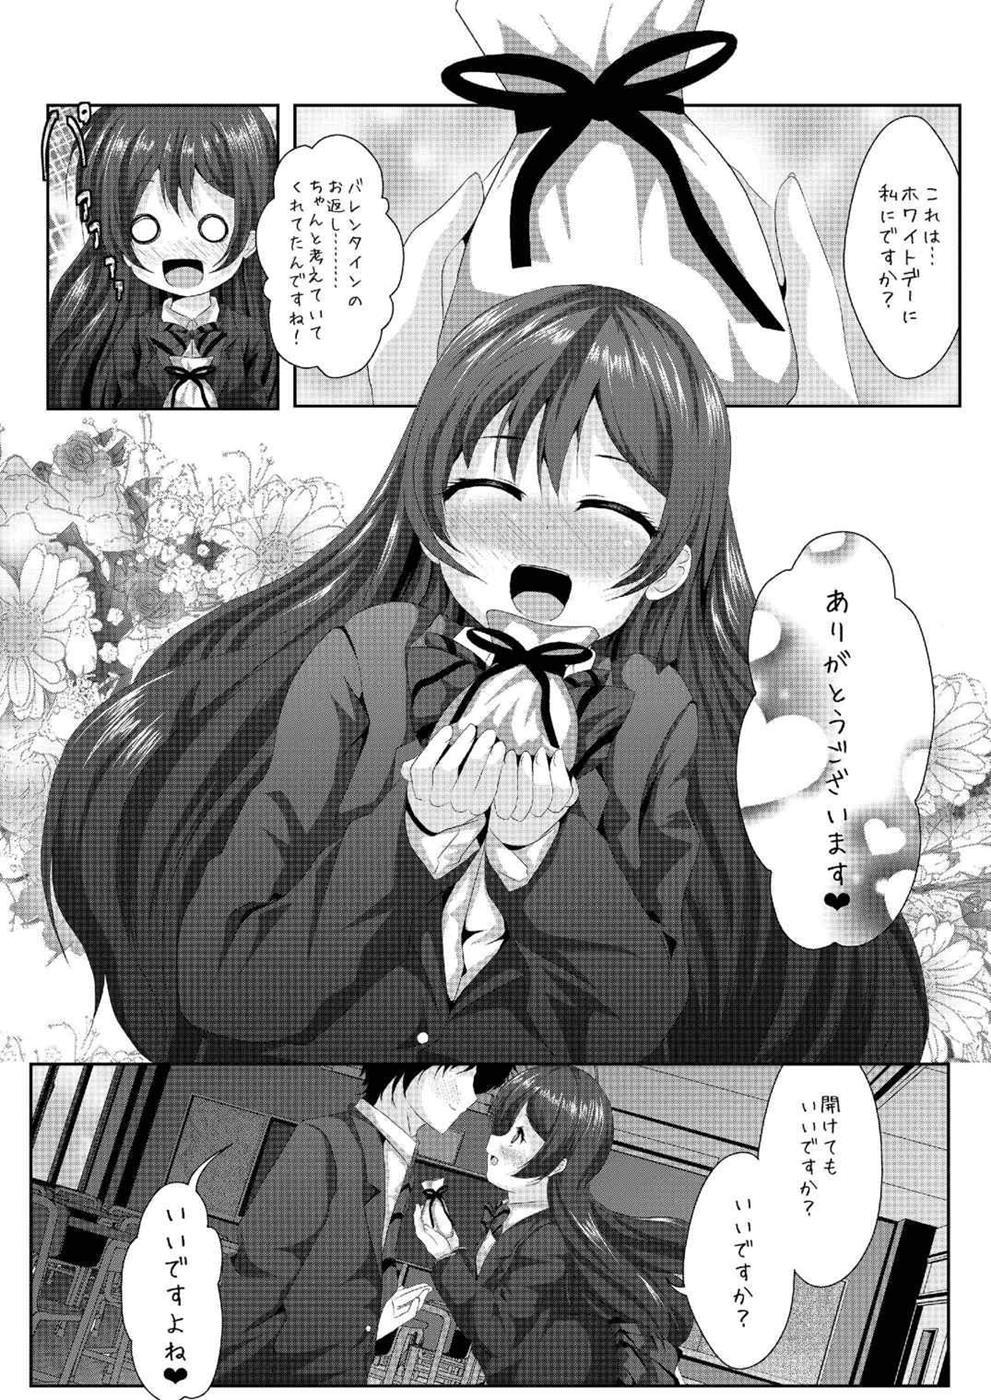 Boys whiteday - Love live From - Page 7